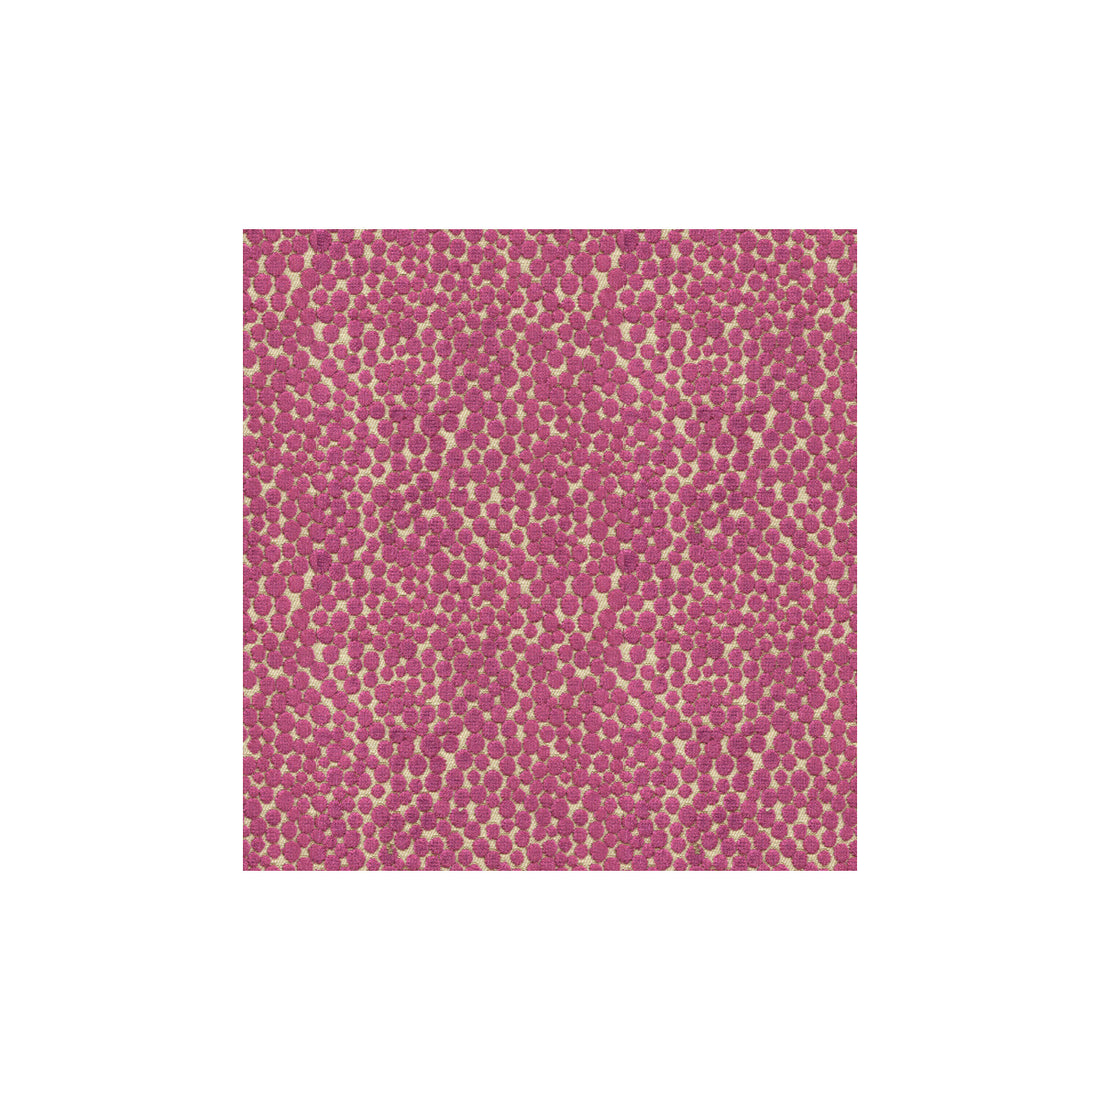 Polka Dot Plush fabric in plum color - pattern 32972.10.0 - by Kravet Couture in the Modern Colors III collection